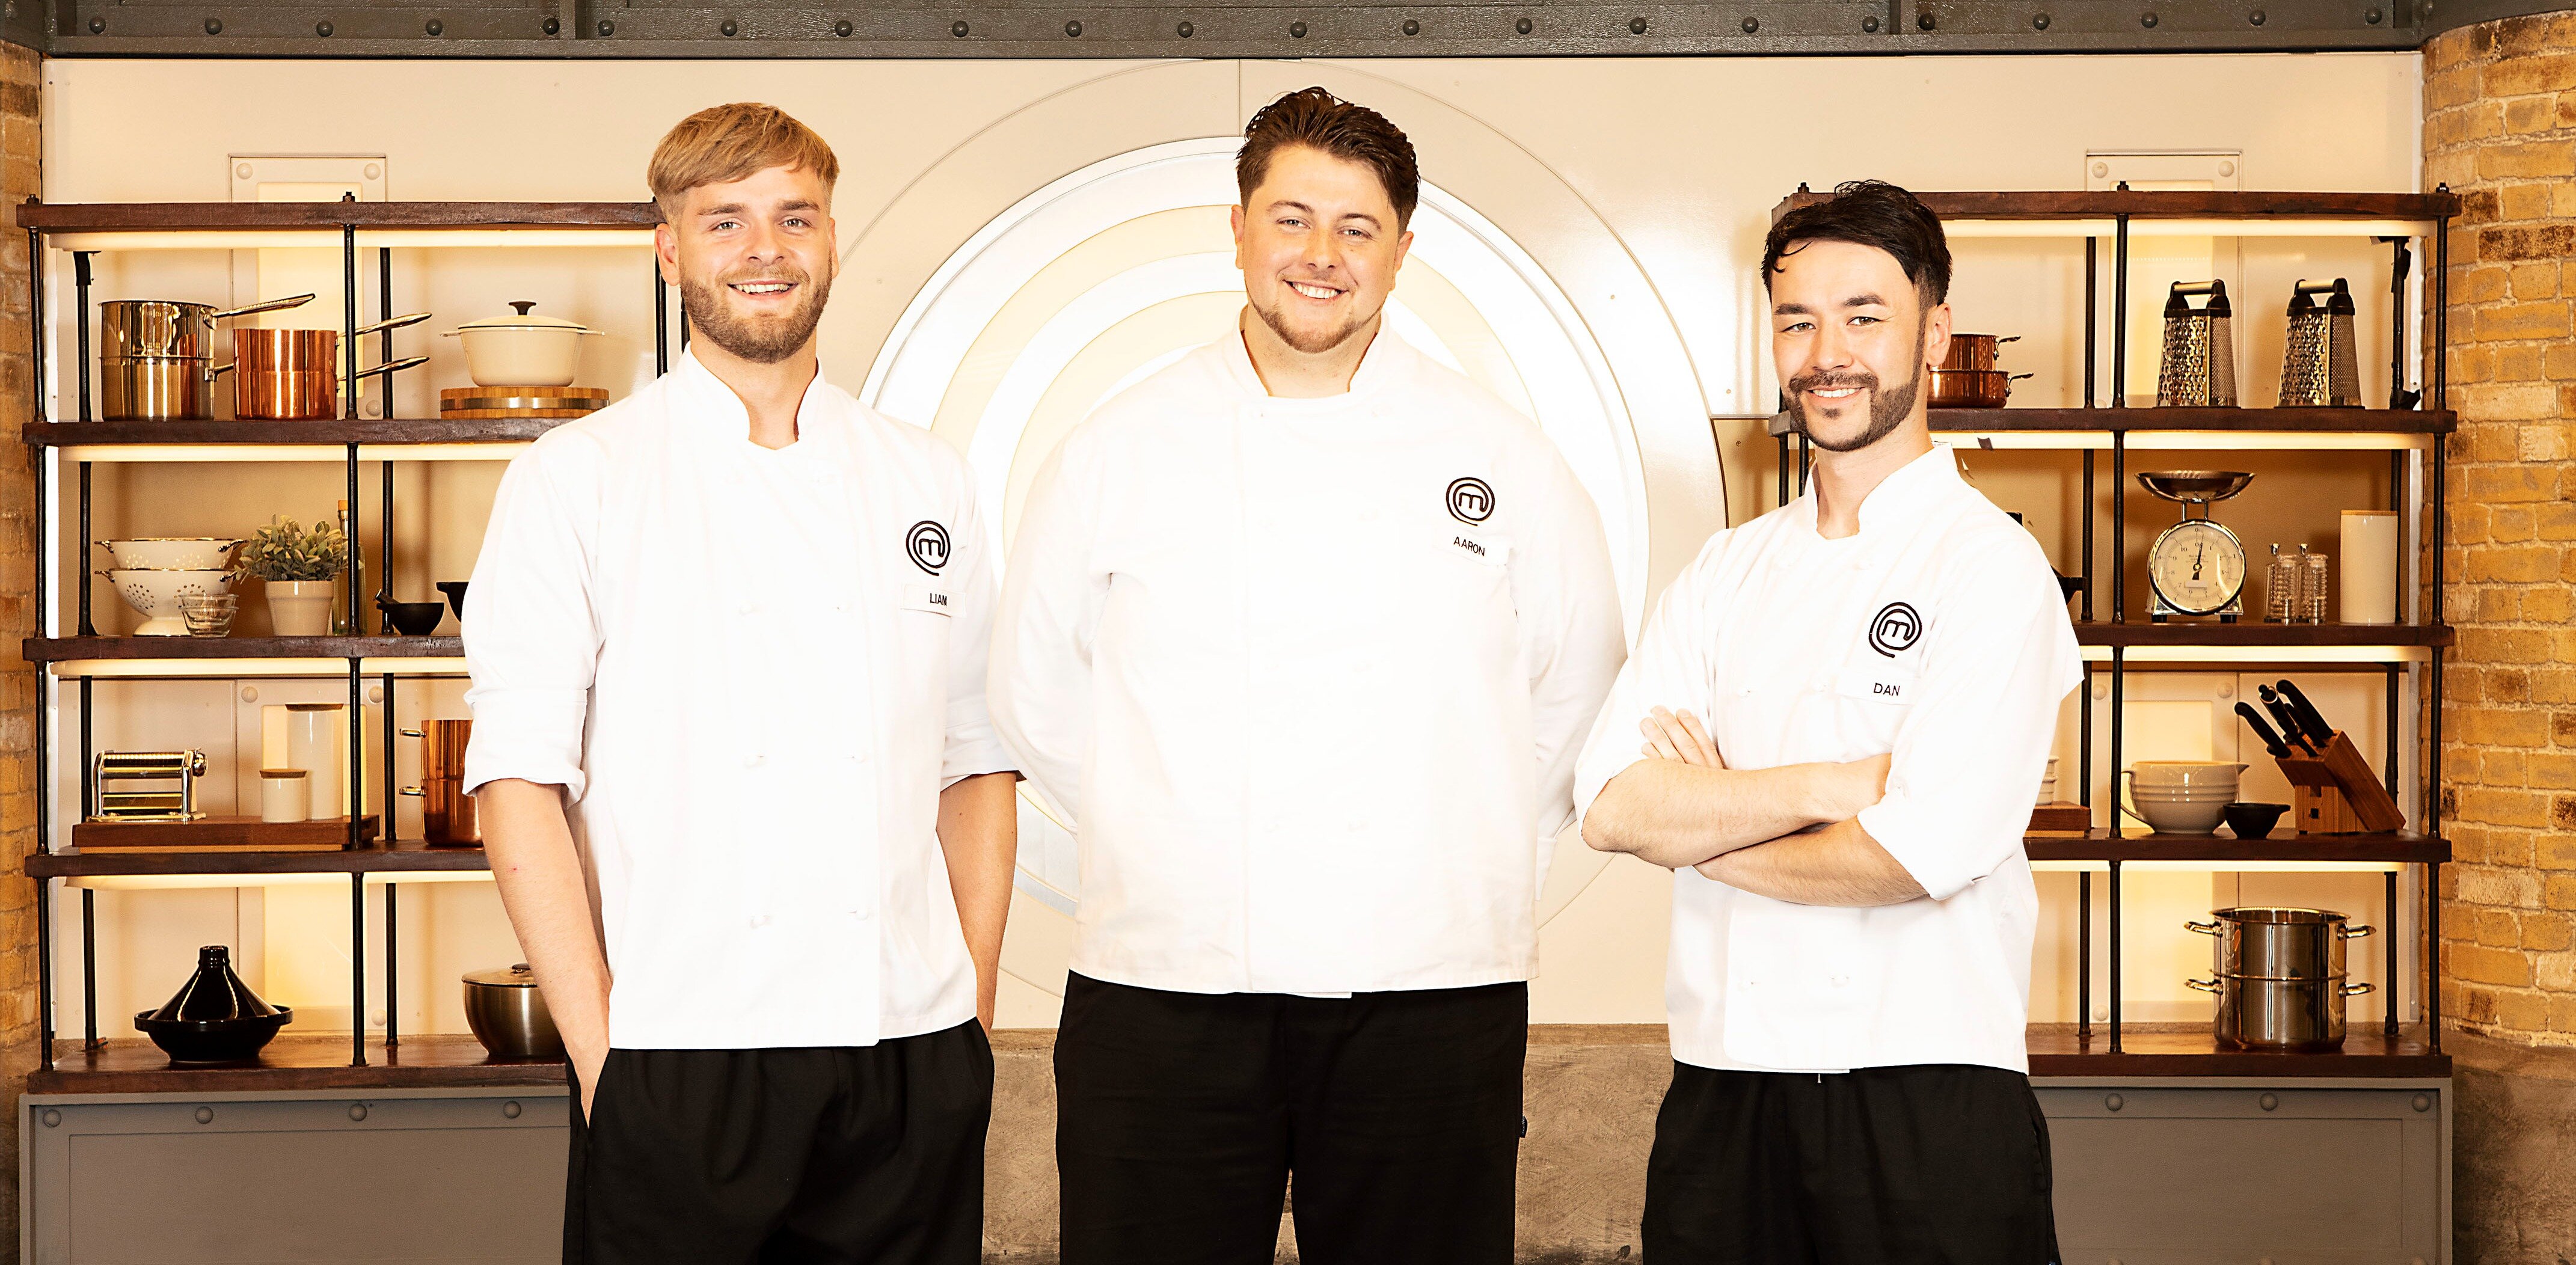 Applications open for MasterChef: The Professionals 2022